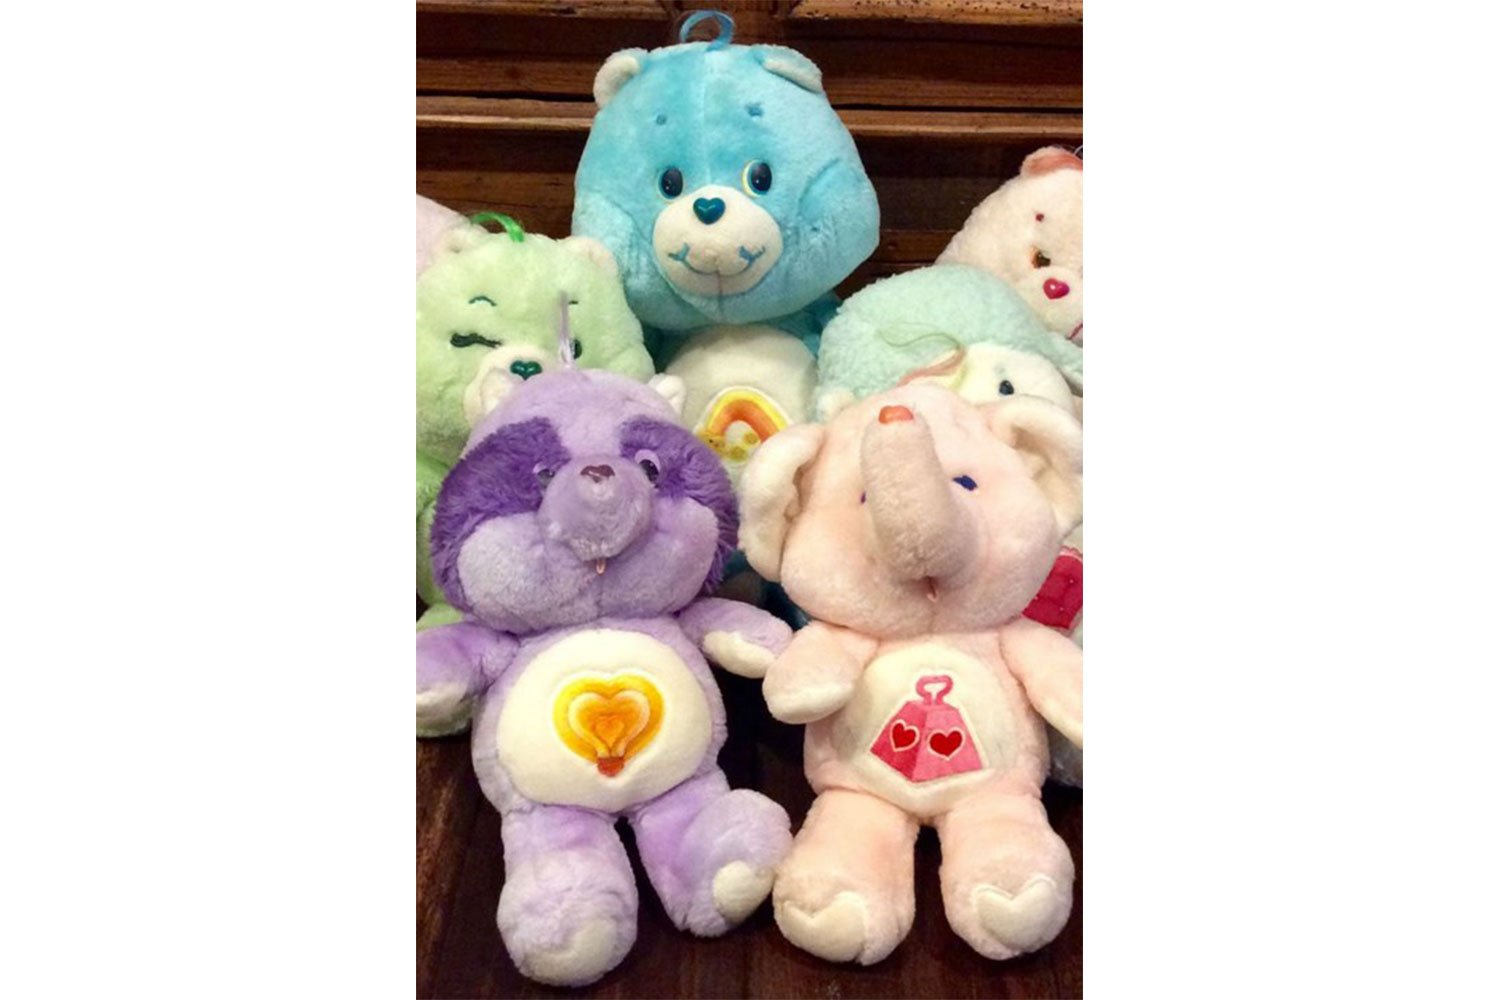 valuable care bears